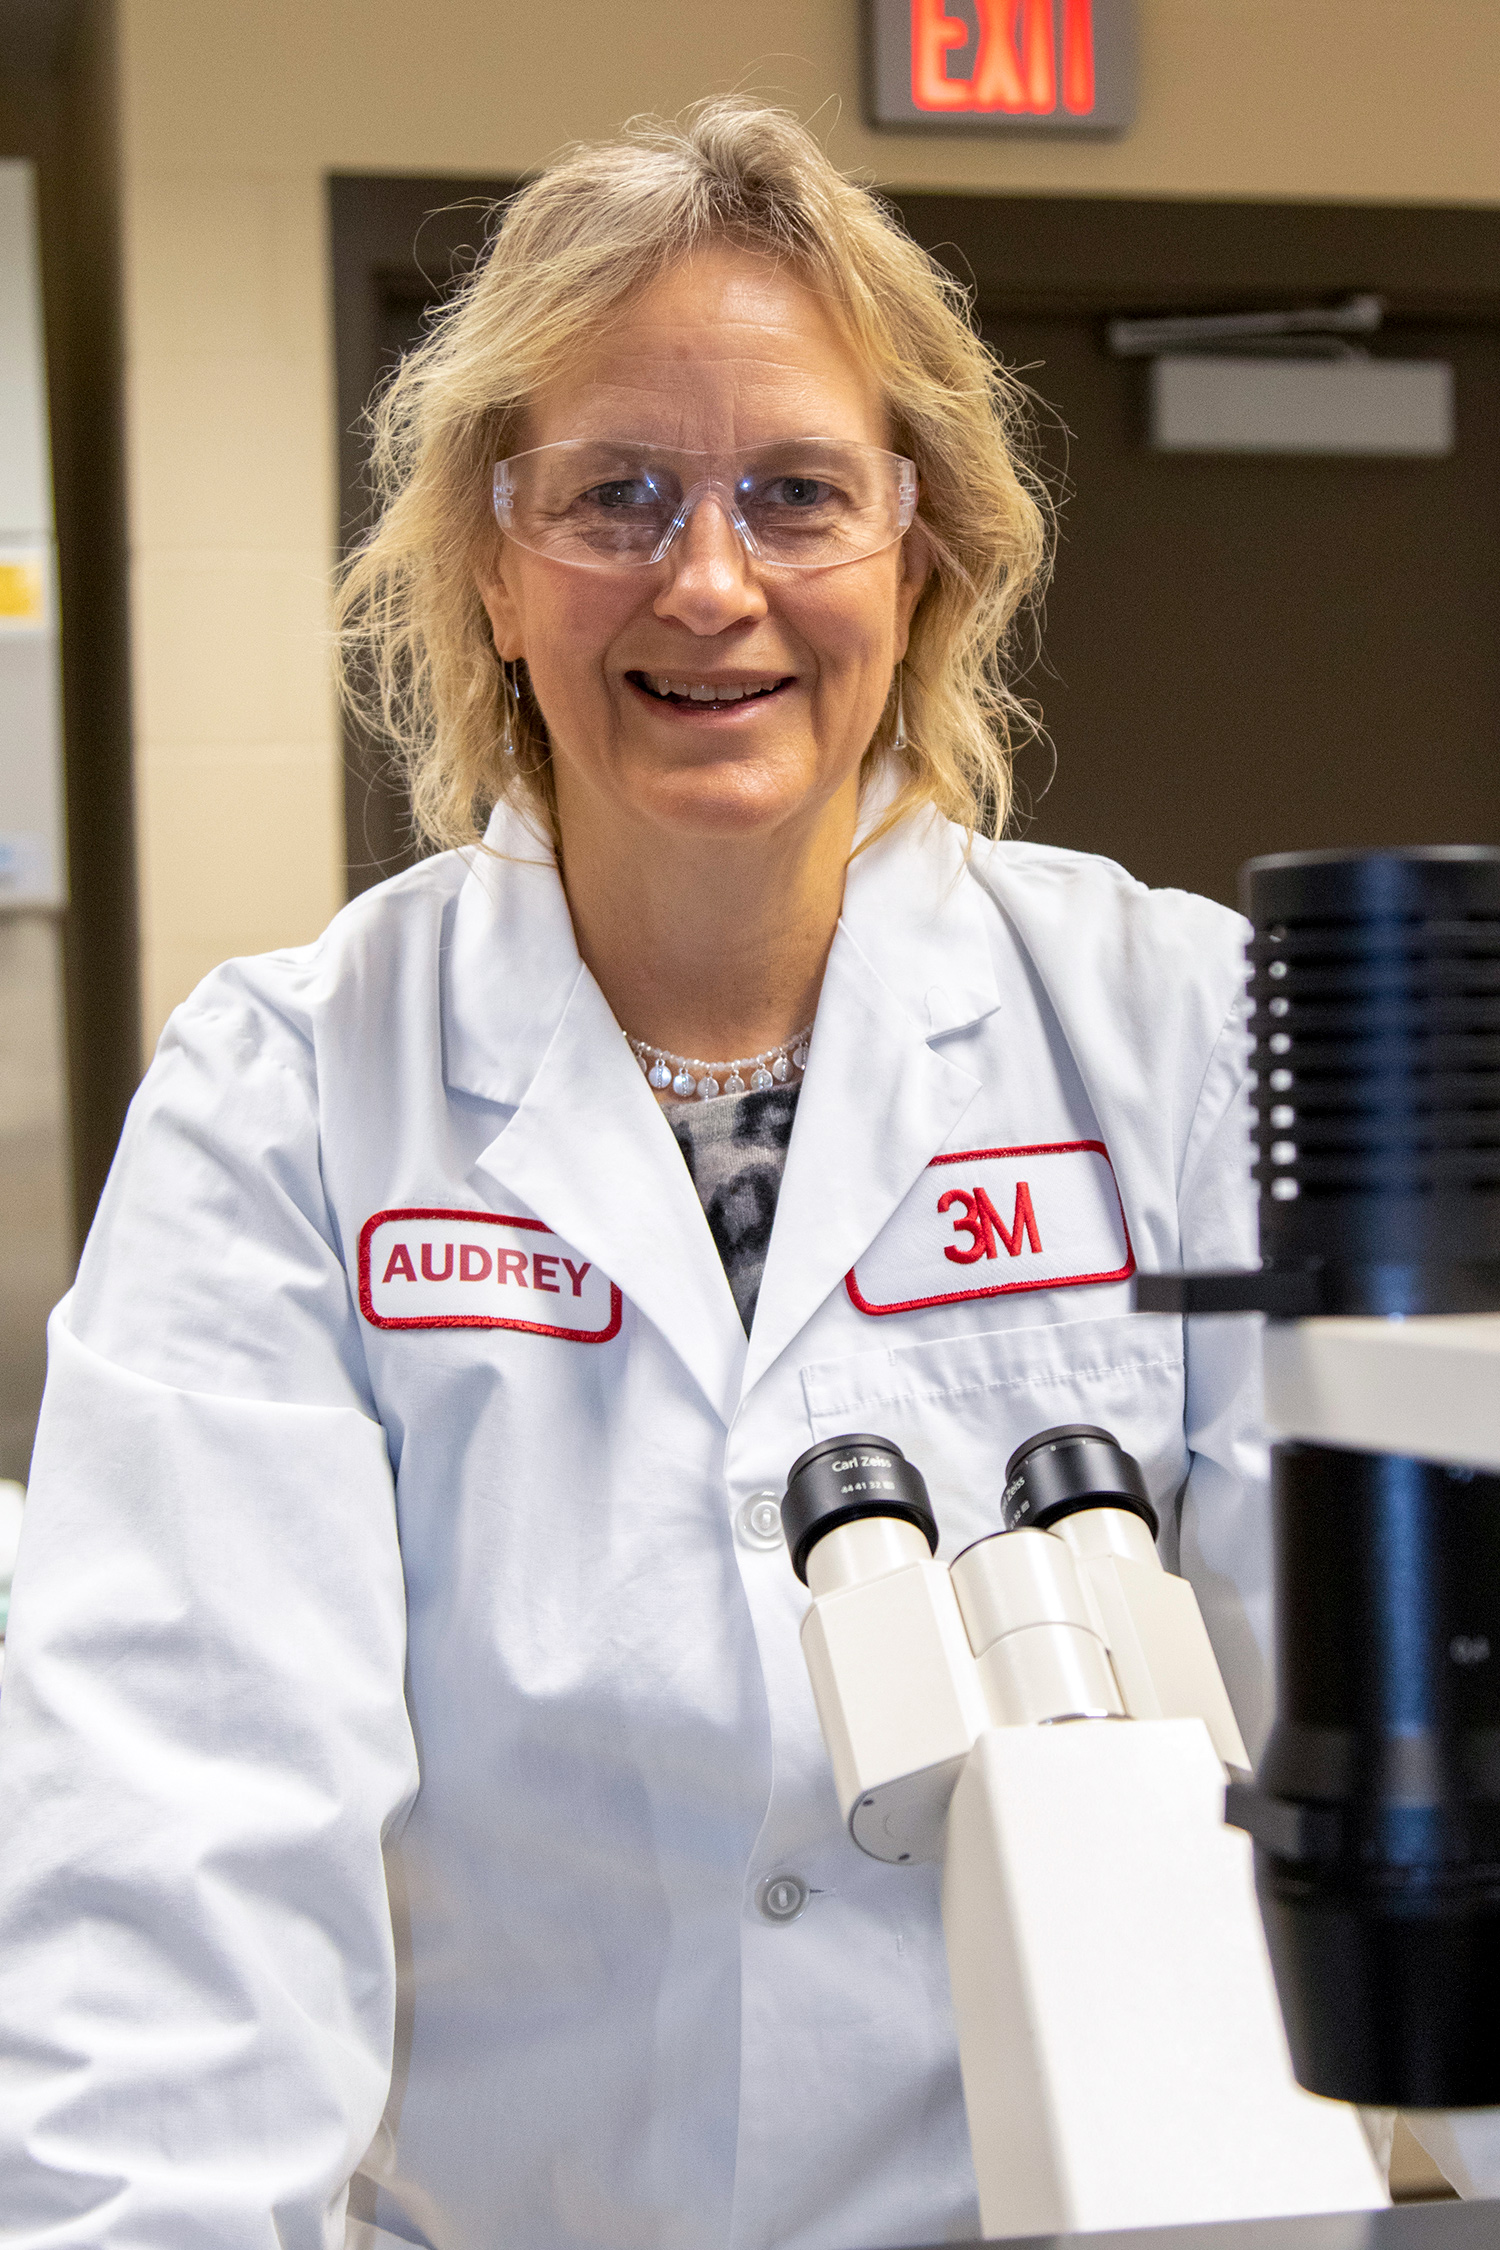 In her lab coat, Audrey Sherman stands behind a microscope.